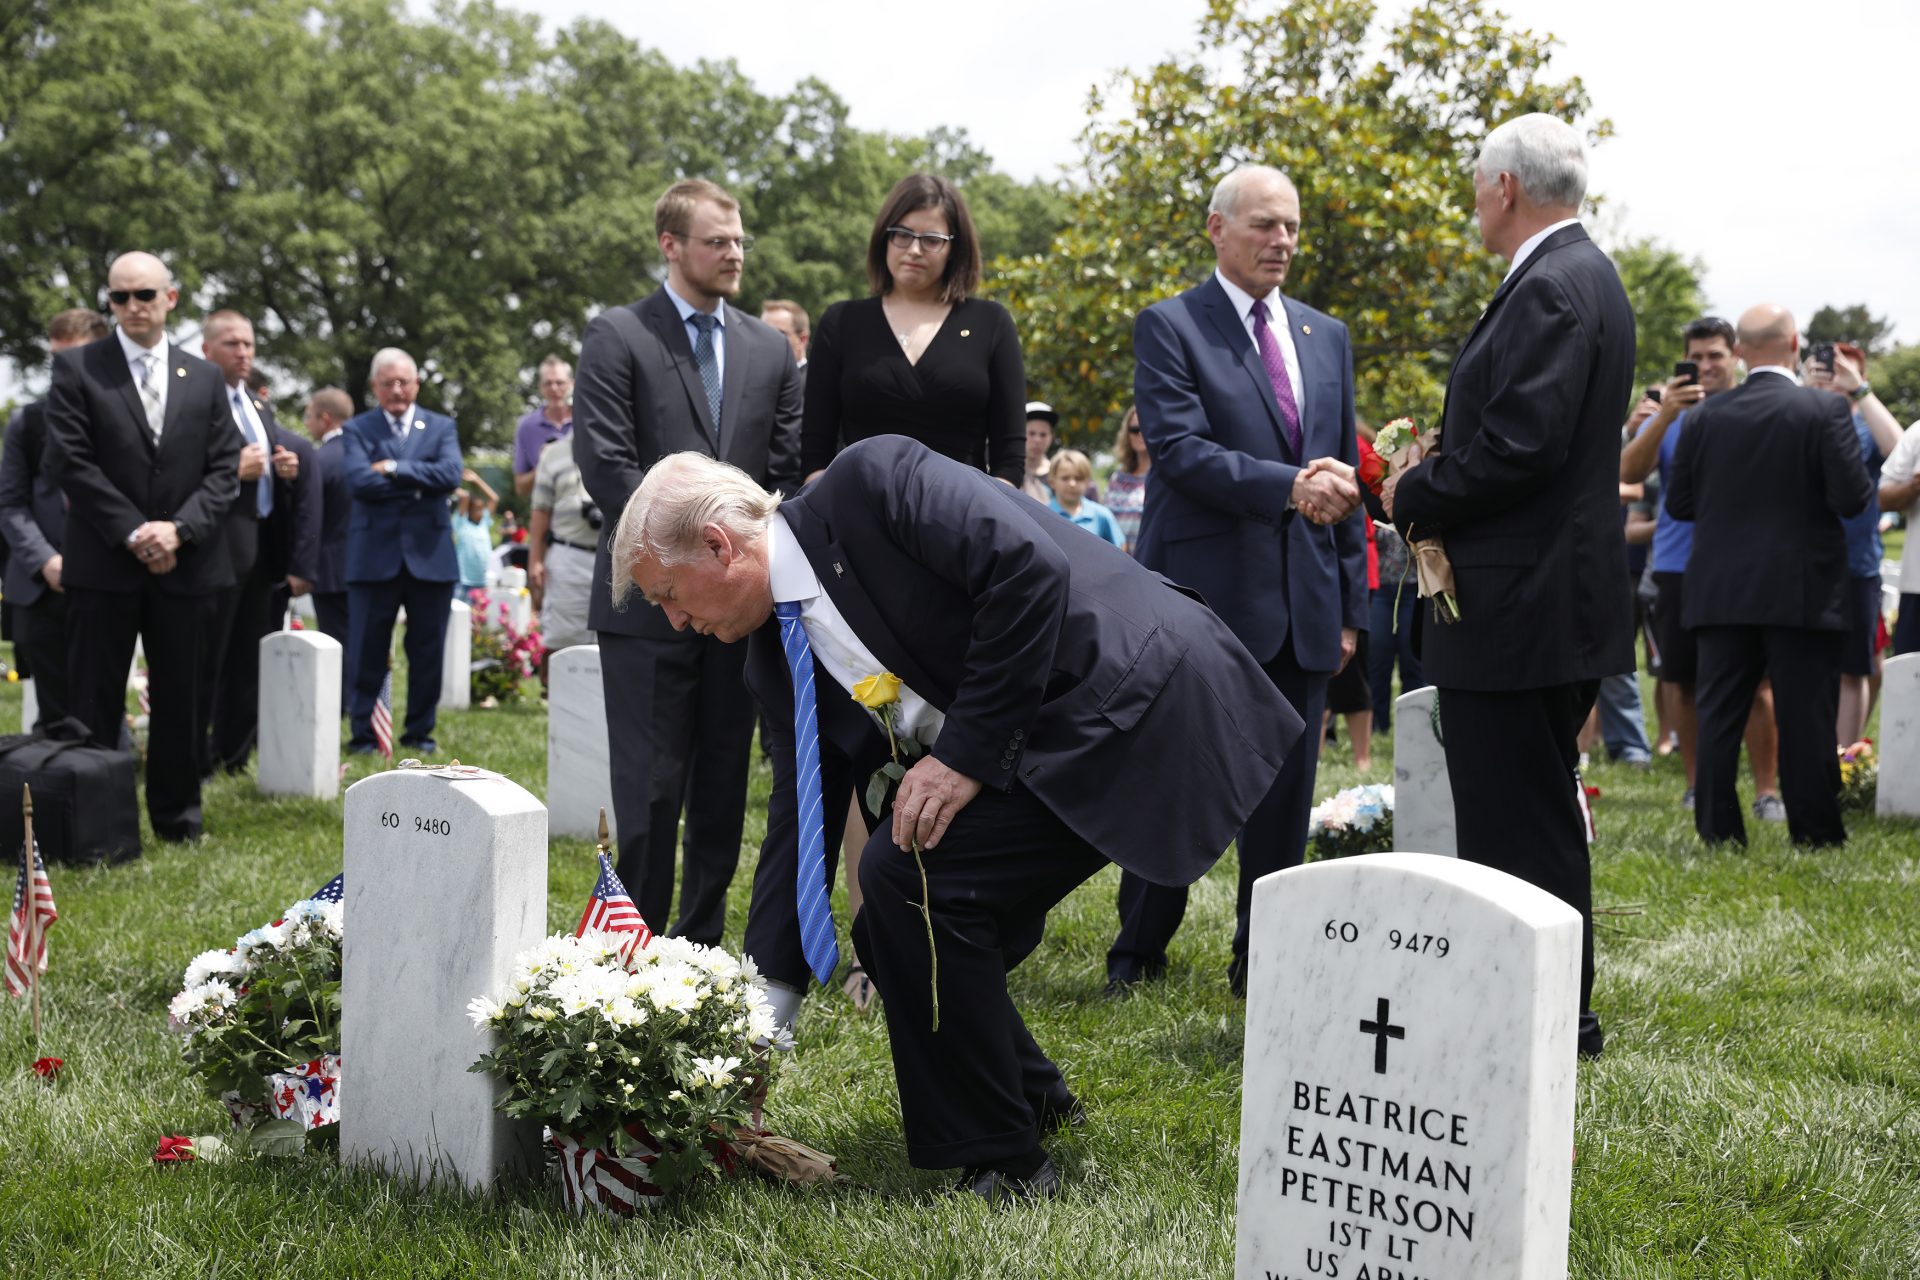 The incident at Arlington National Cemetery 